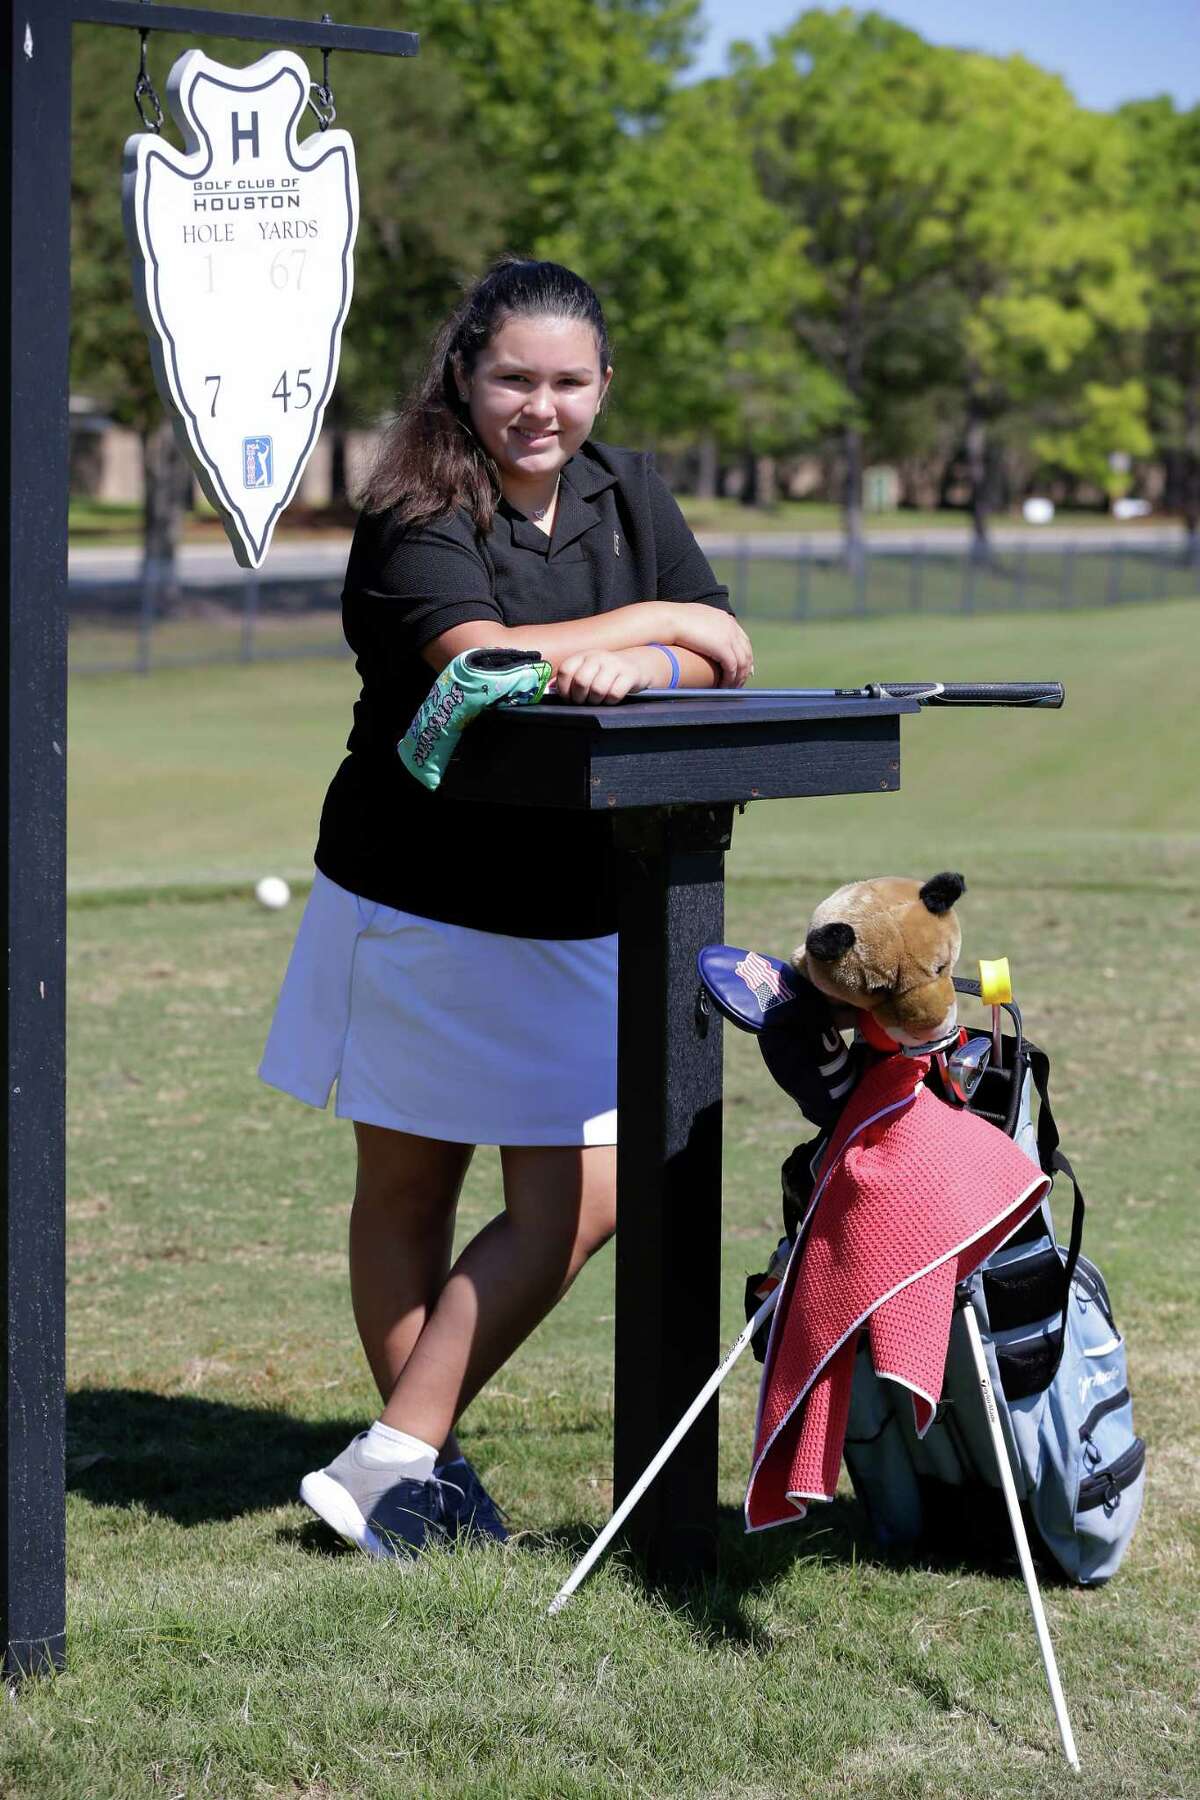 Ceci Treviño, a 12 year old golfer who has battled a brain tumor, poses on the tee box during practice on the short course at the Golf Club of Houston.